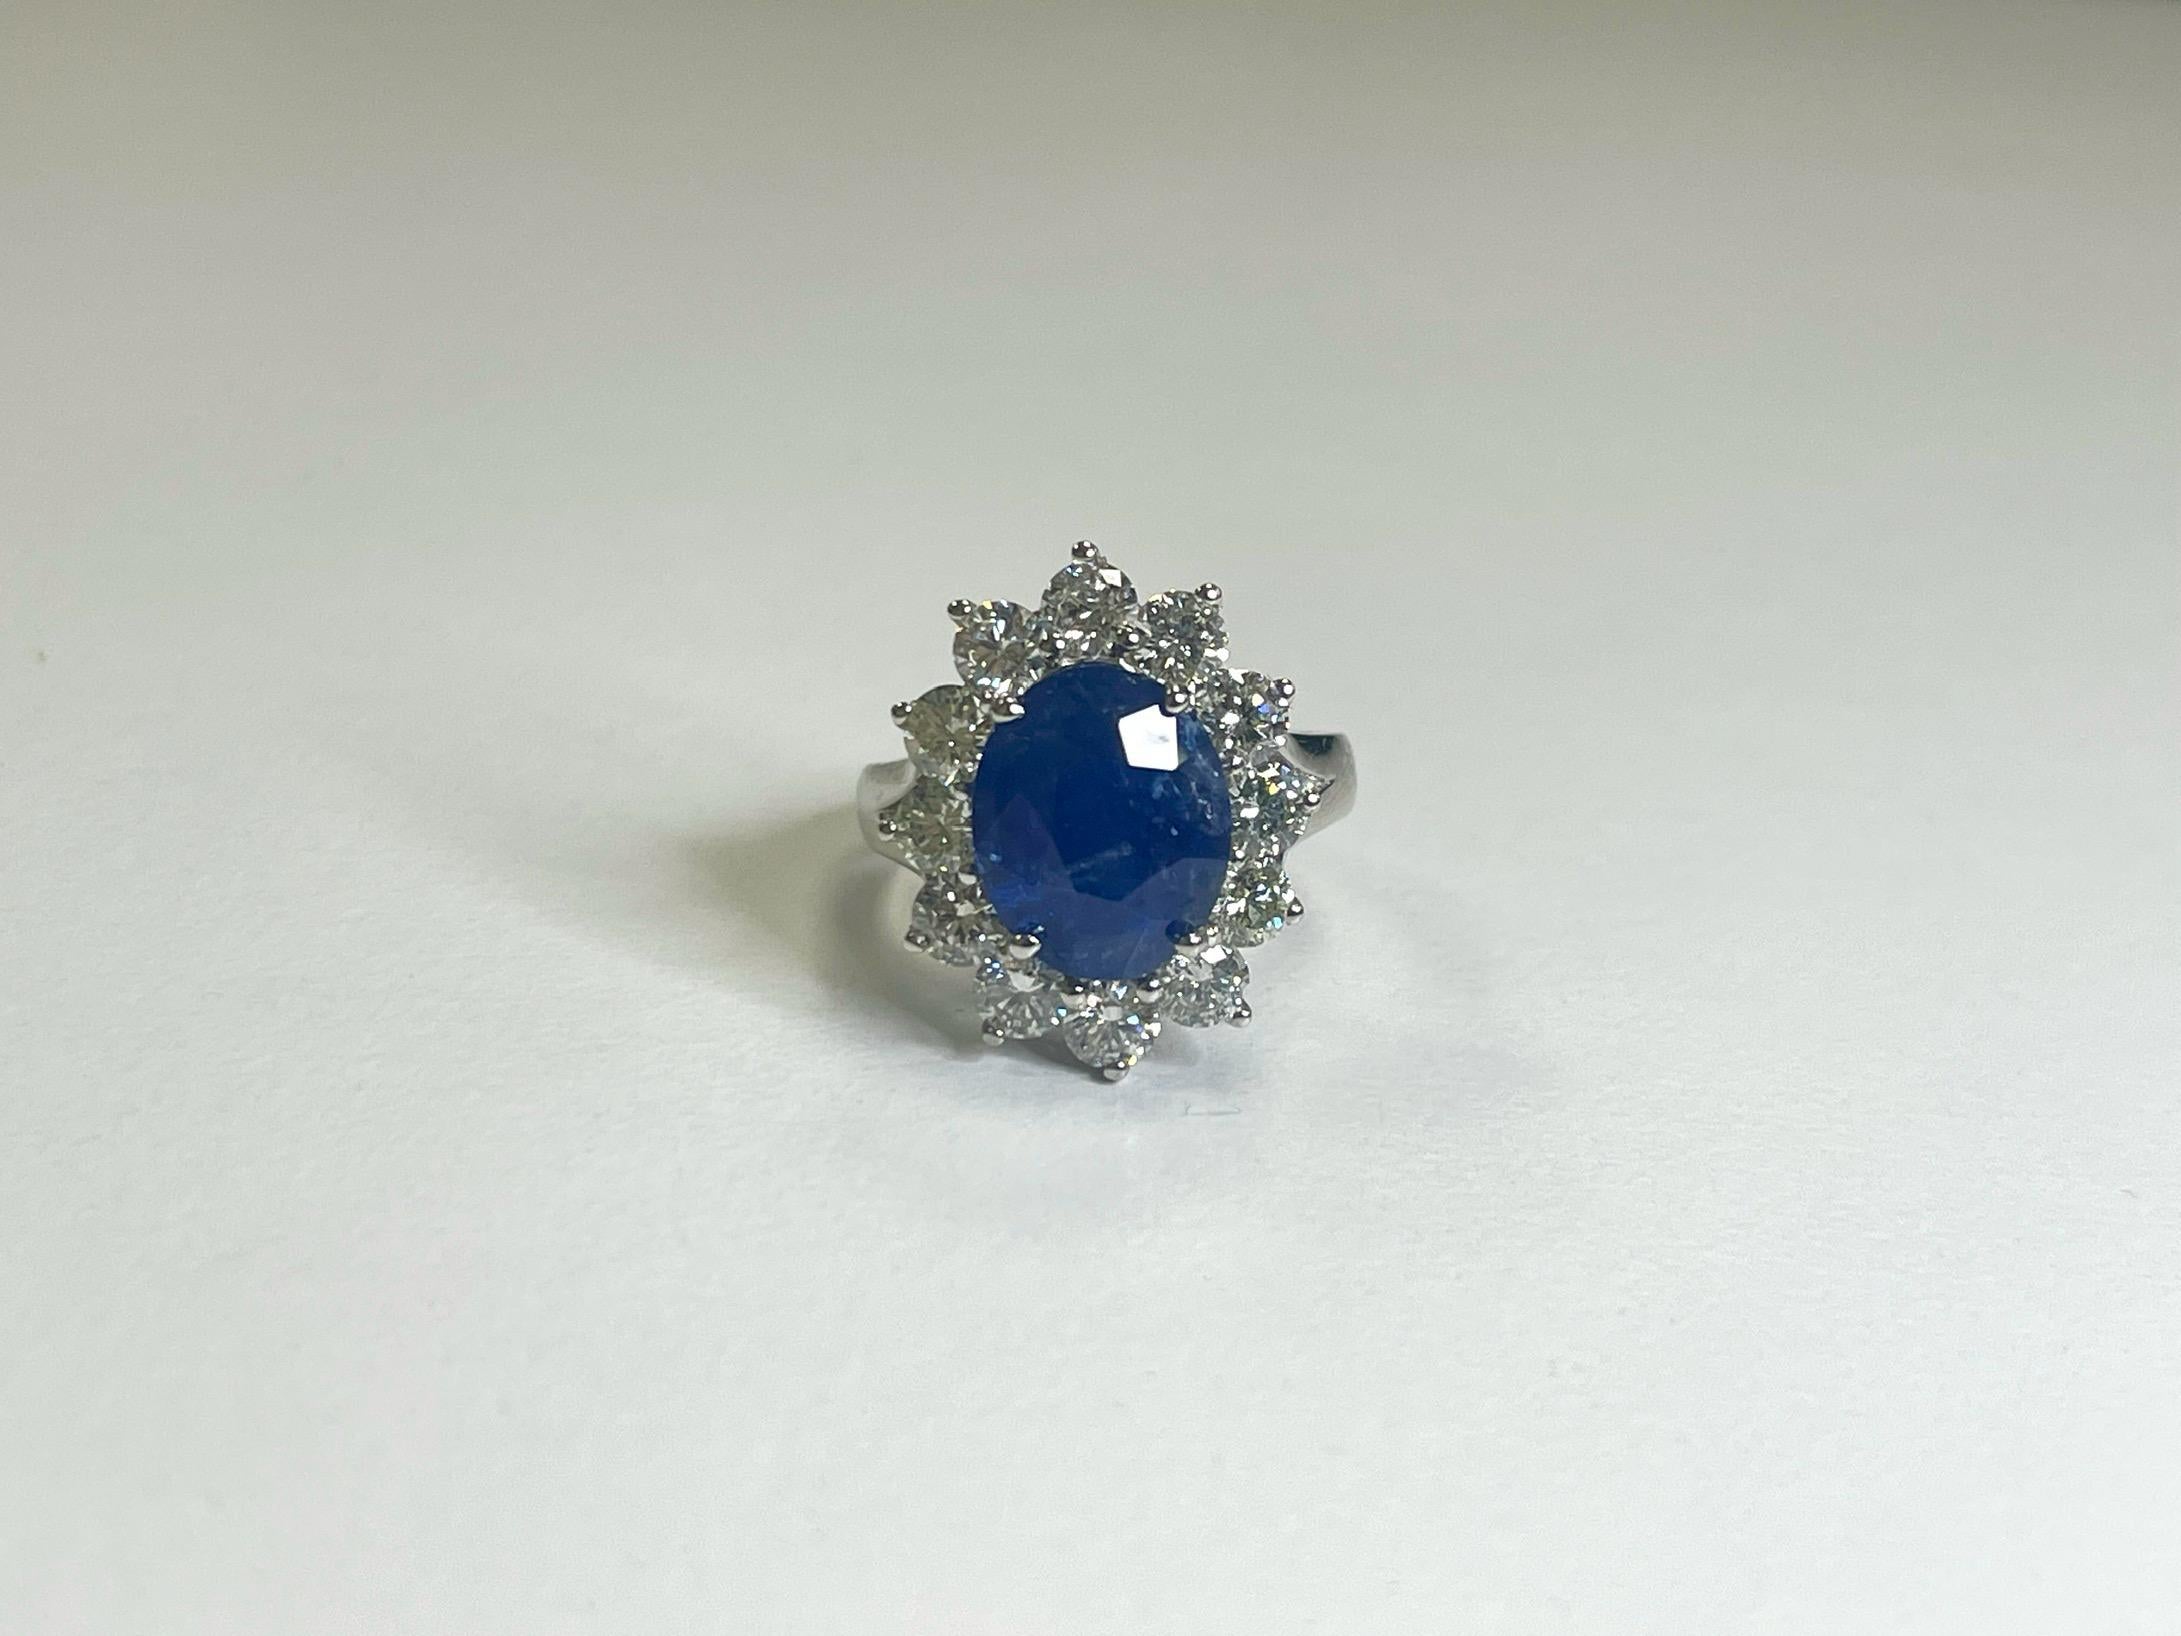 Beautiful Natural Sapphire and Natural Diamond adorned 14K White Gold Ring in size 6.

Center stone: natural 5.63 carats sapphire (heat only)
secondary stone: 2.16 carats natural diamonds, 13 pieces

8.14 grams, average G-H, VVS

*Free shipping